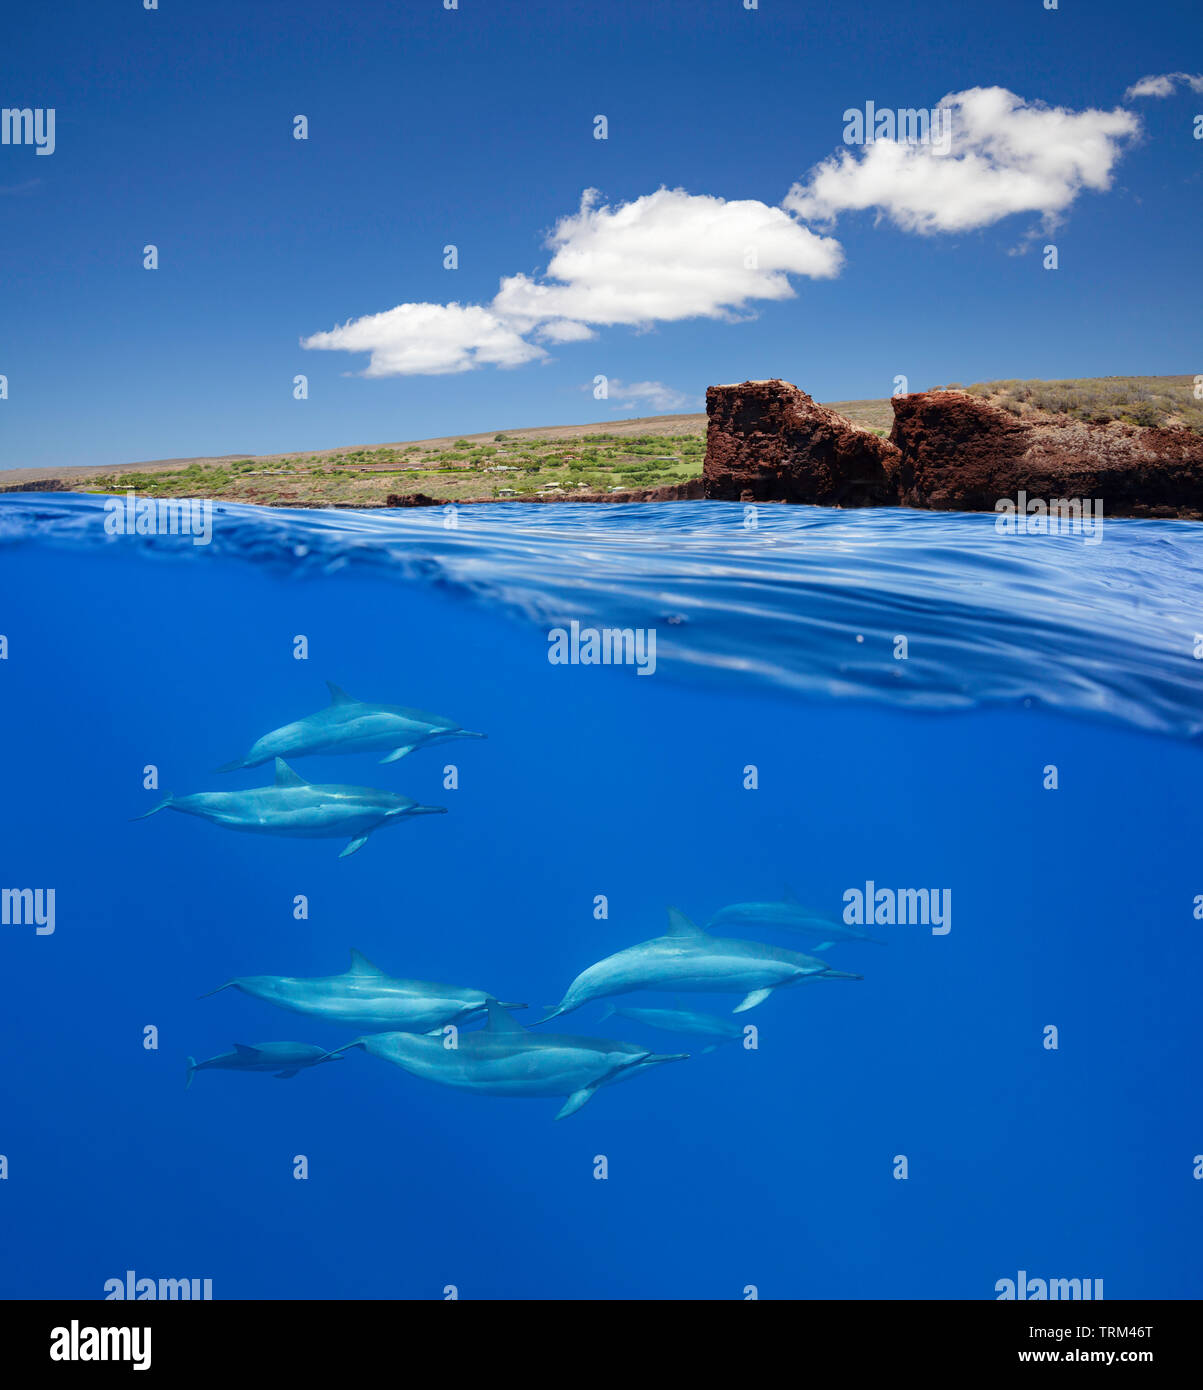 A split view of spinner dolphin, Stenella longirostris, below and Puu Pehe or Sweetheart Rock off the island of Lanai above, Hawaii. Stock Photo